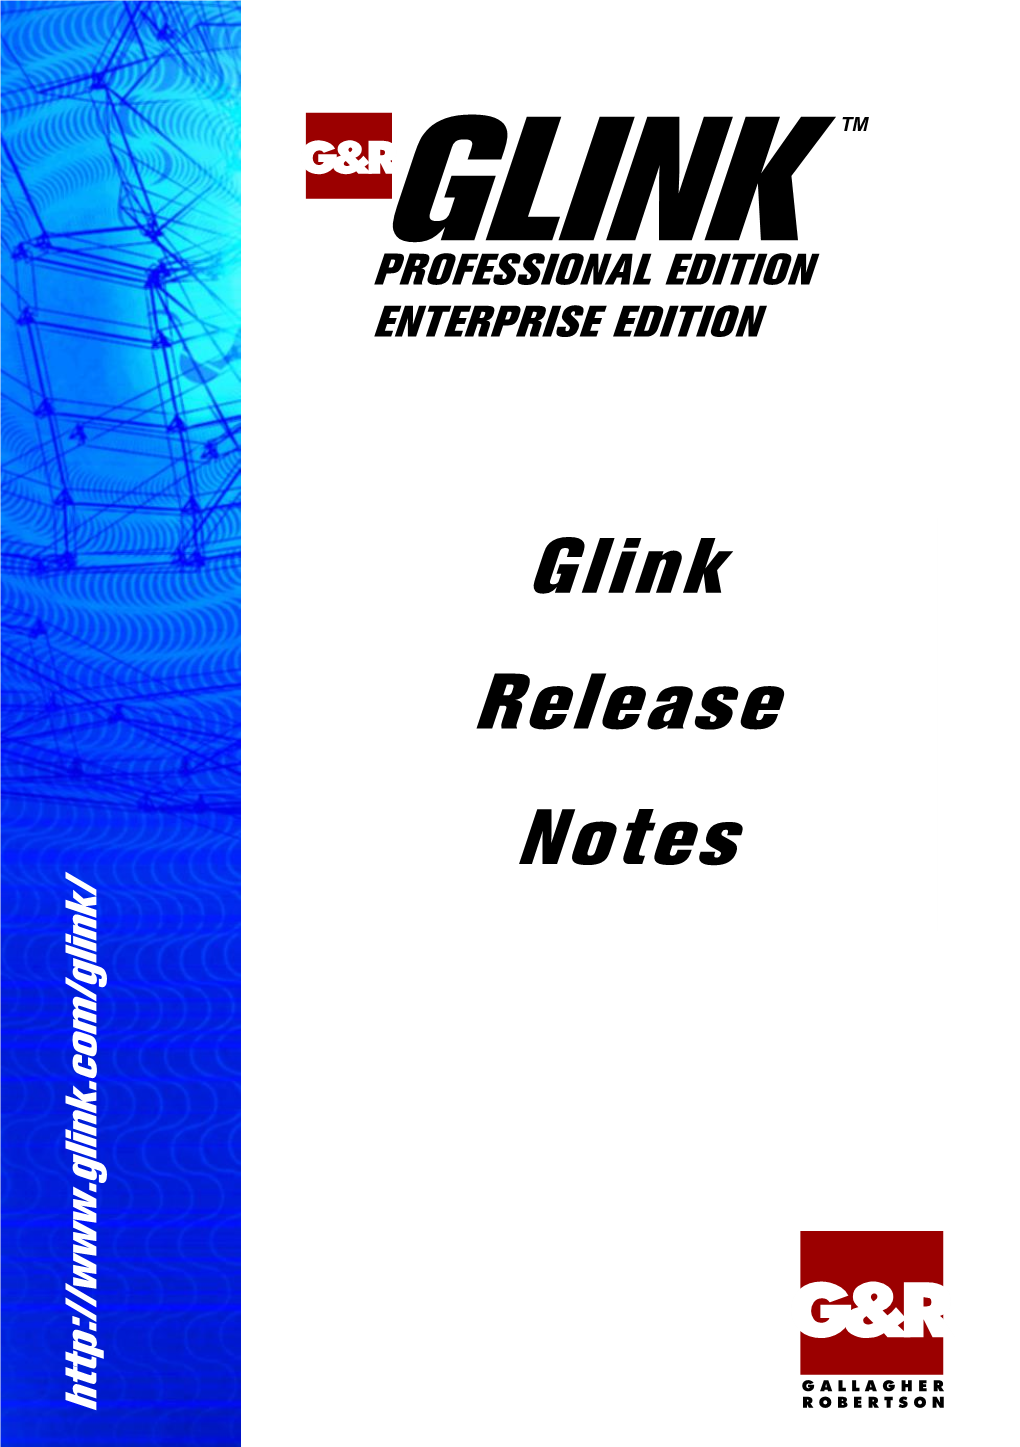 Glink Release Notes I Contents